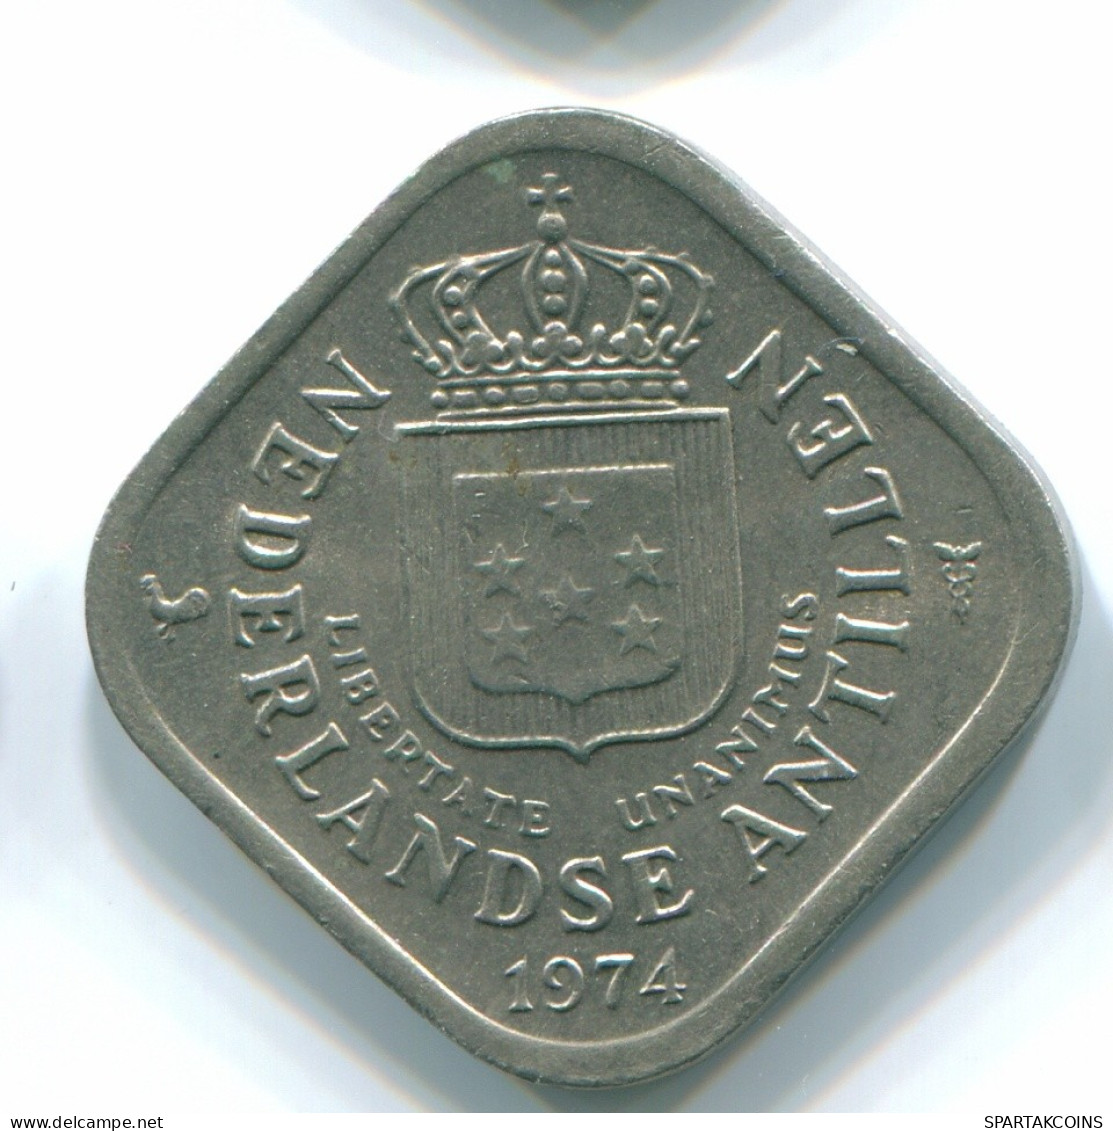 5 CENTS 1974 NETHERLANDS ANTILLES Nickel Colonial Coin #S12210.U.A - Netherlands Antilles